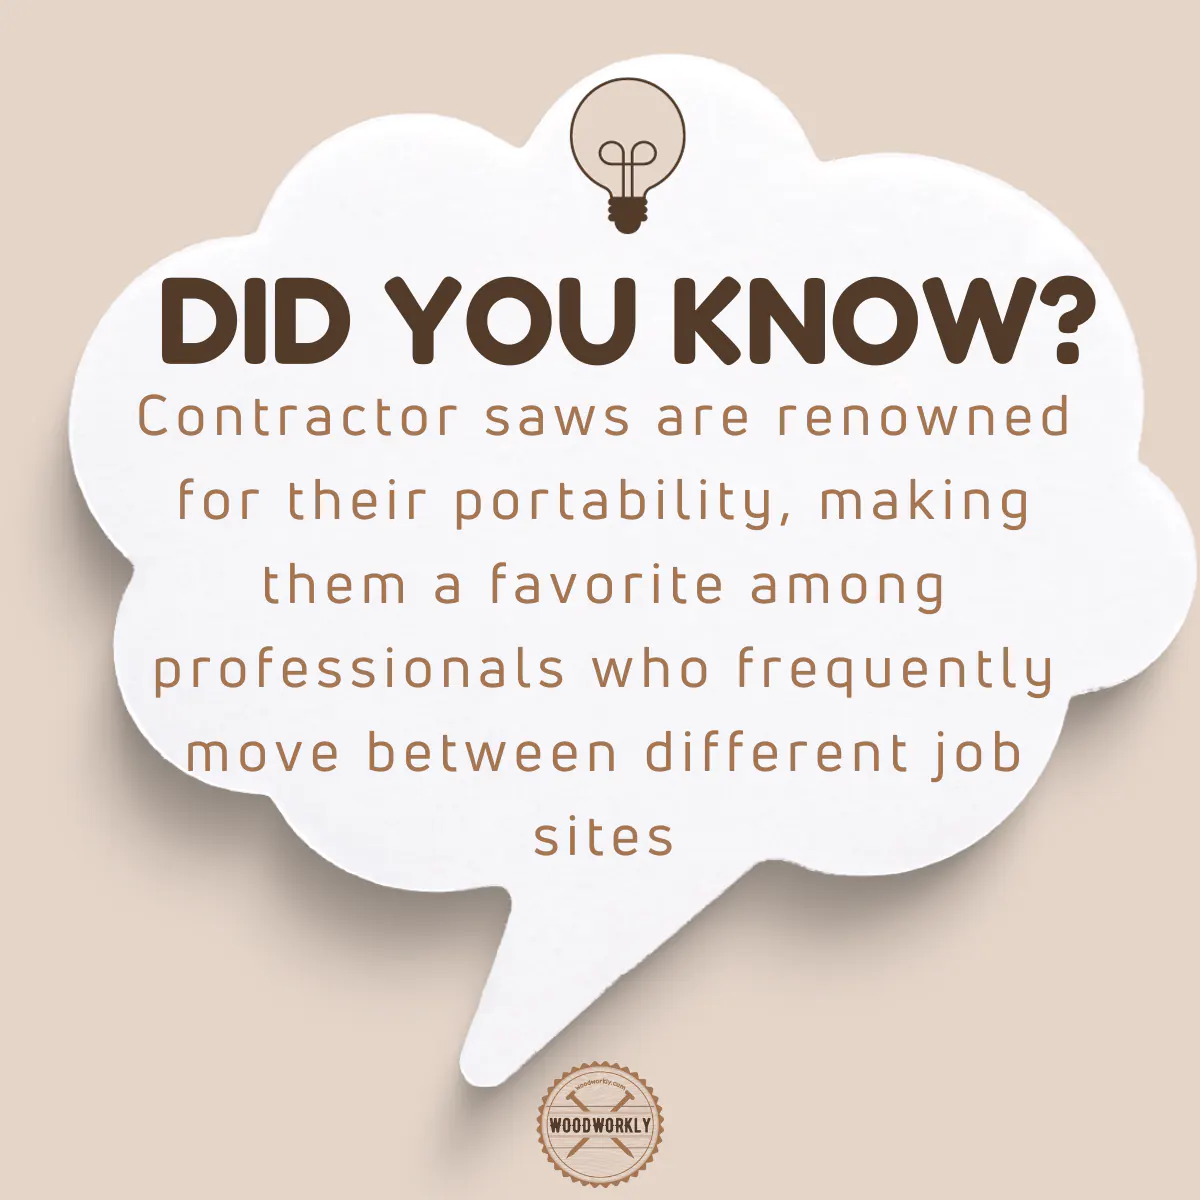 Did you know fact about Contractor Saw